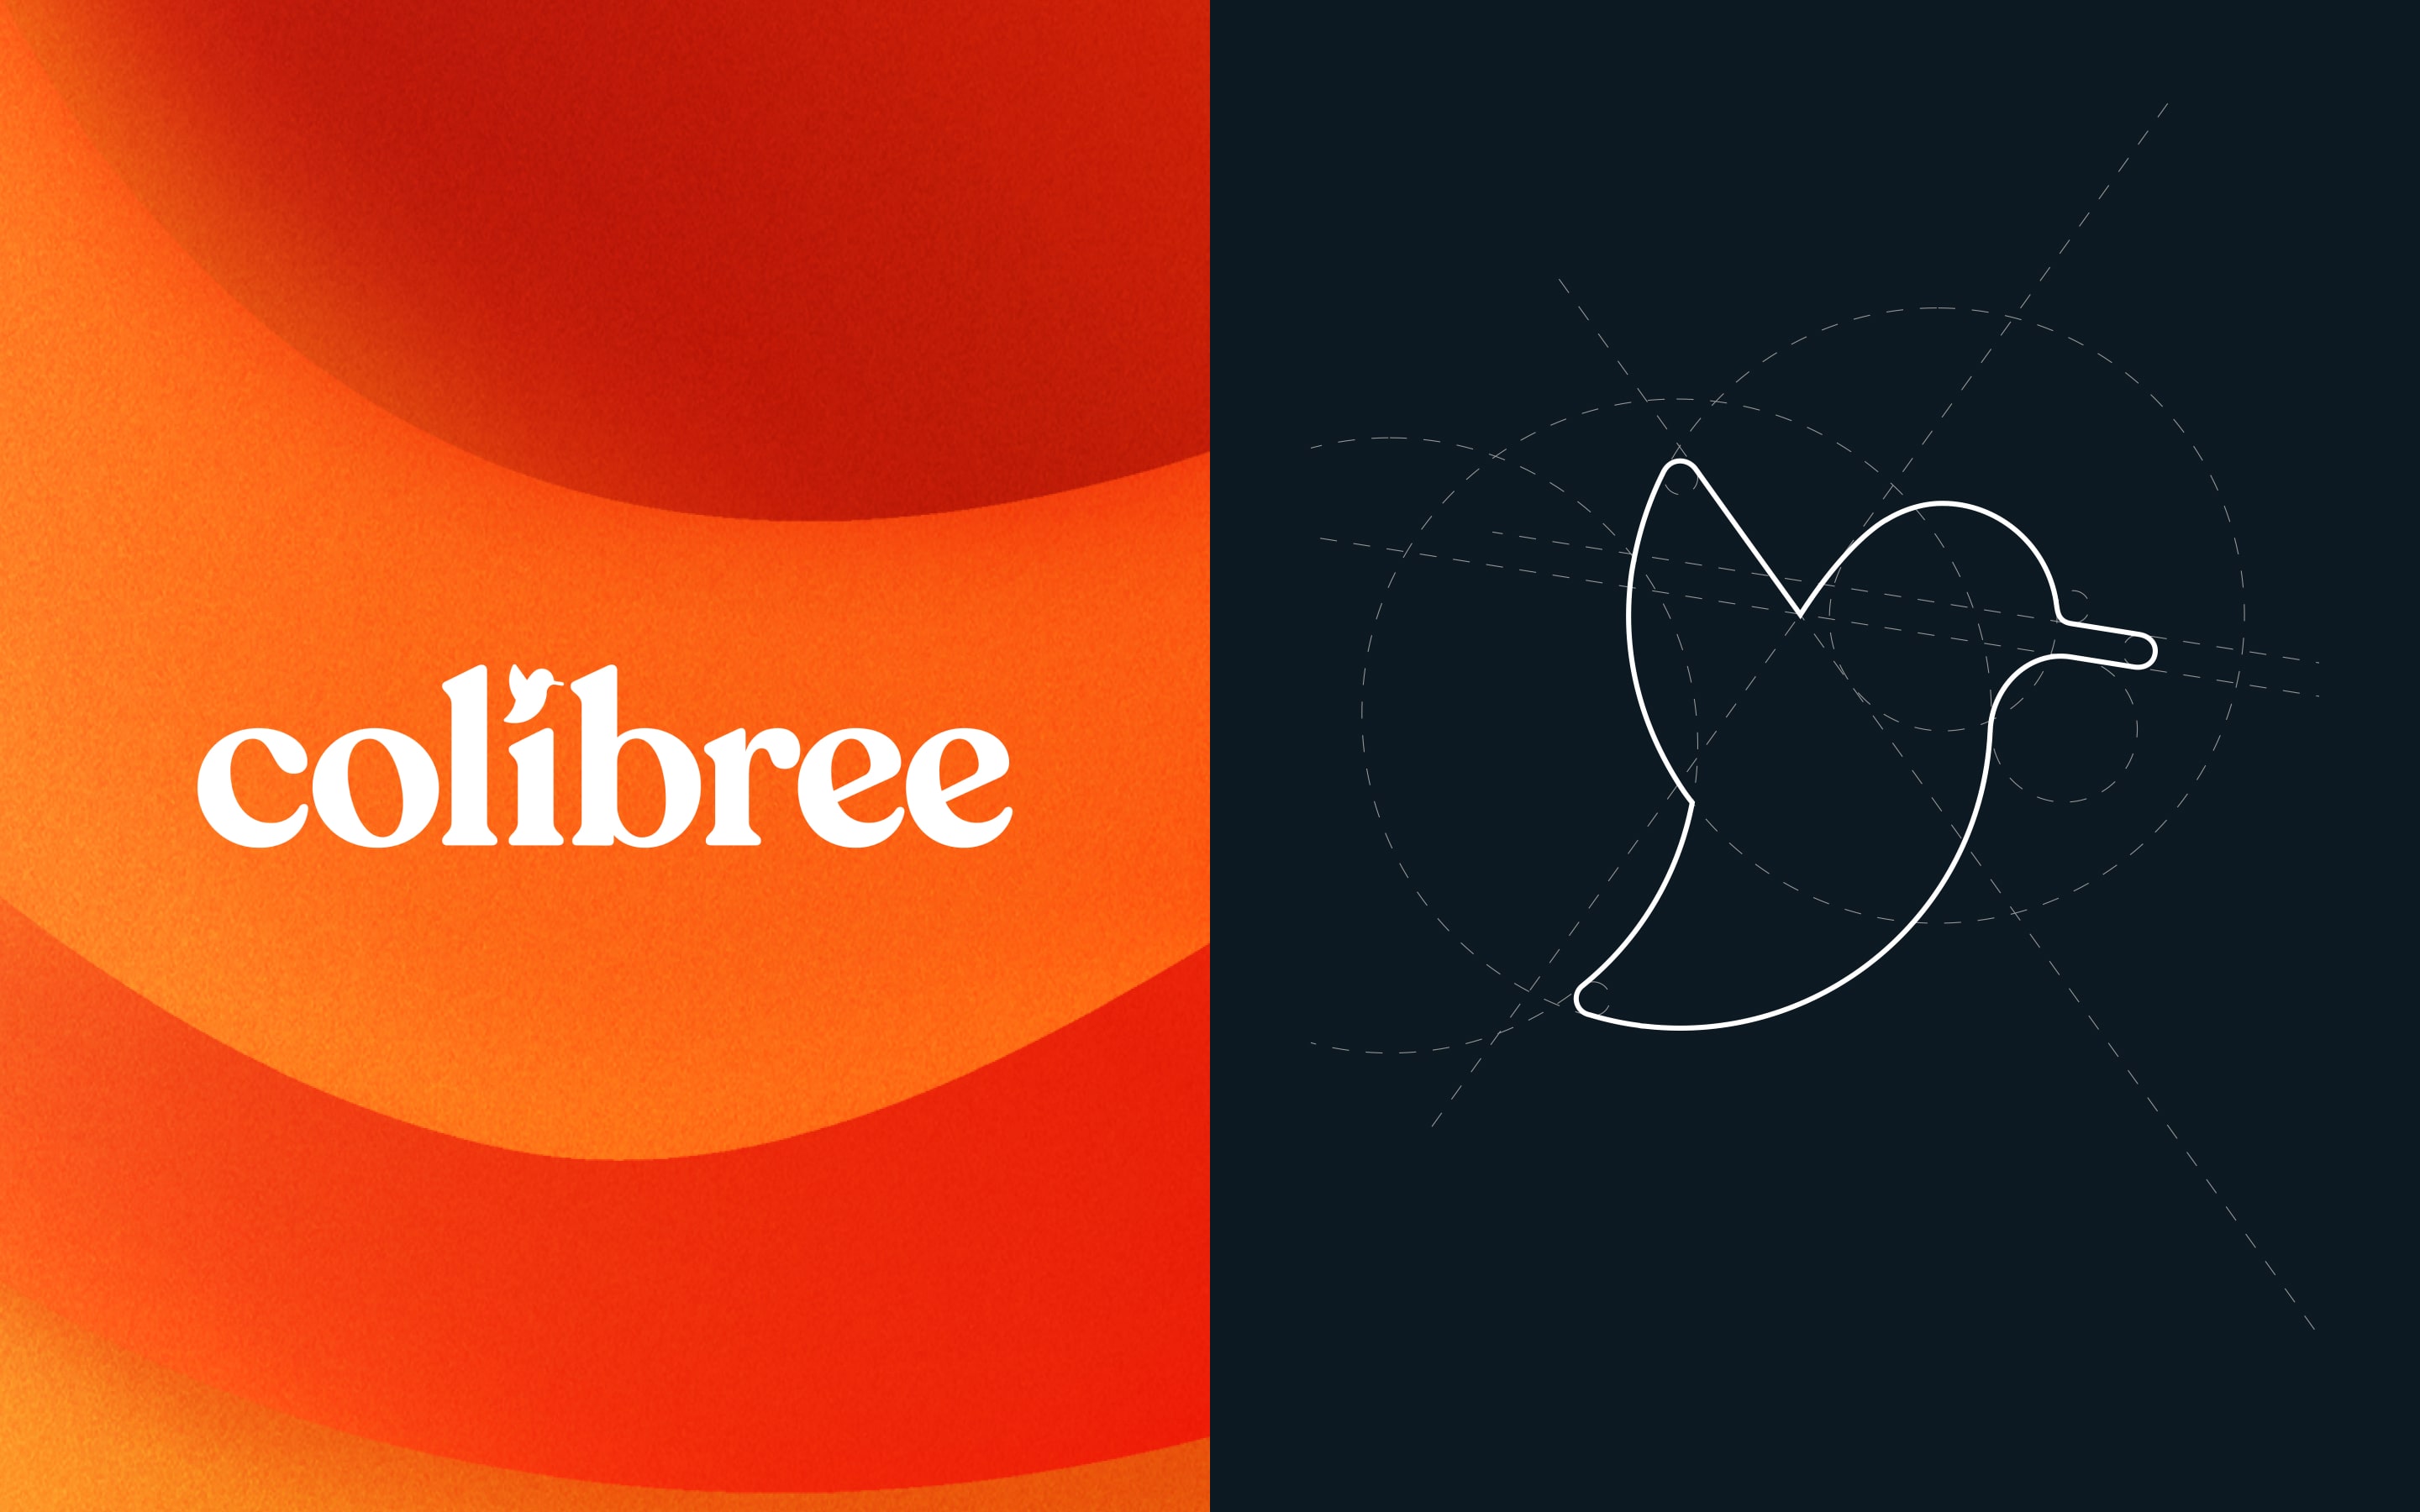 Colibree is an independent real estate platform with a new professional model based on the freedom and cooperation of its agents, and an unparalleled service and experience for its clients, positioning itself as a benchmark in the sector. 
